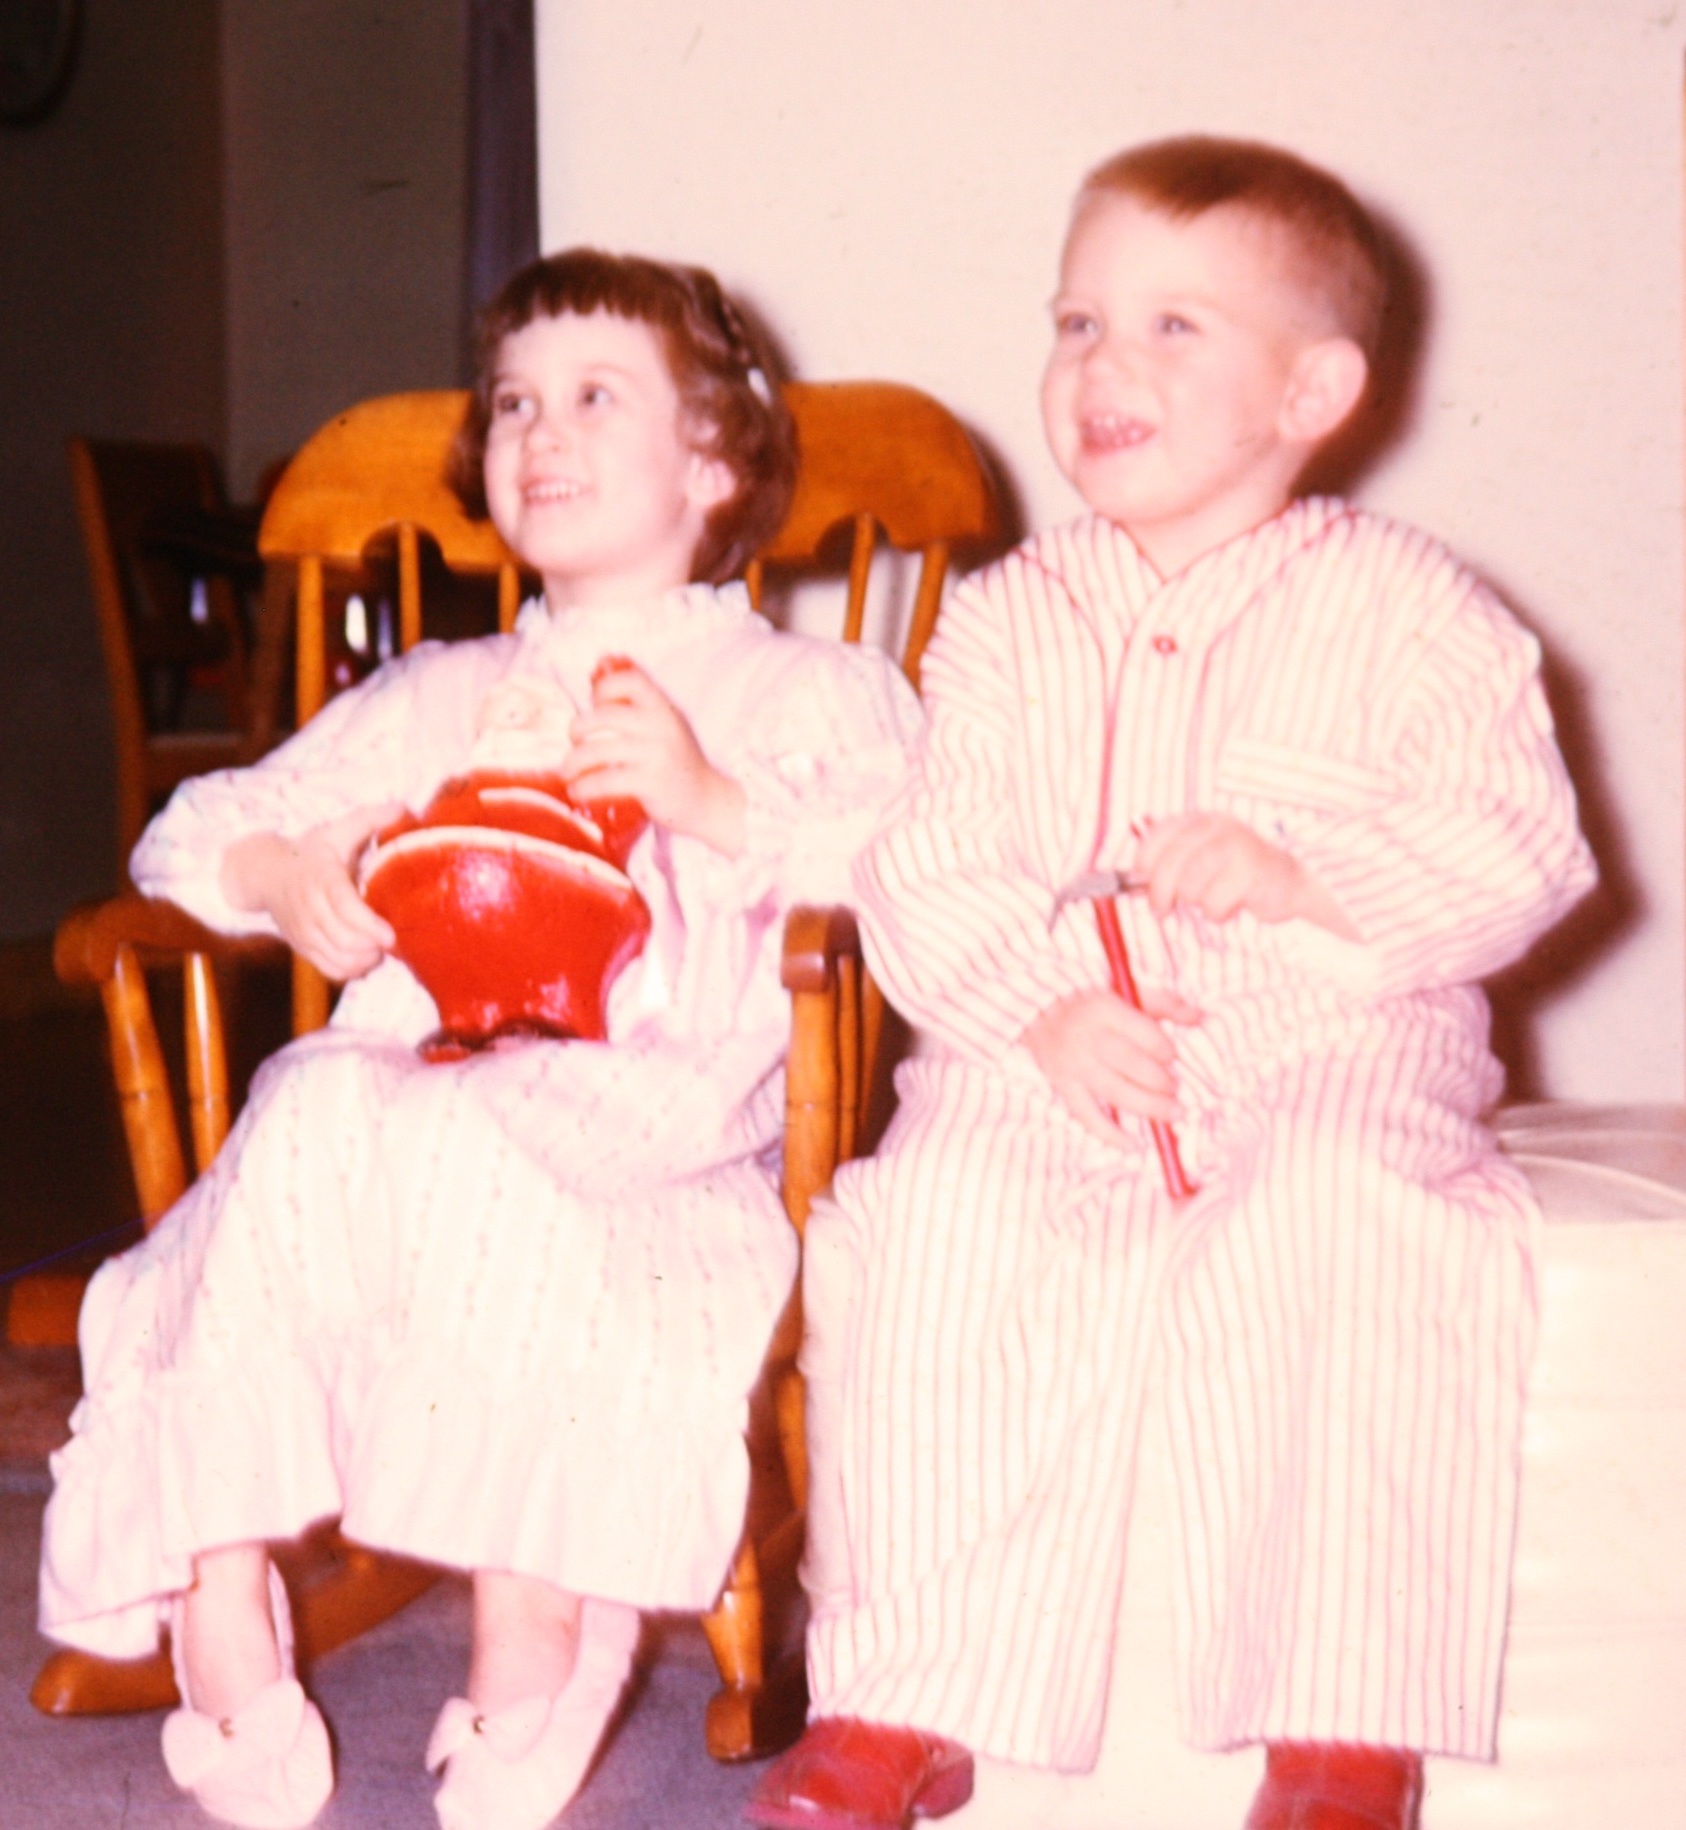 Posed with my brother in my rocking chair